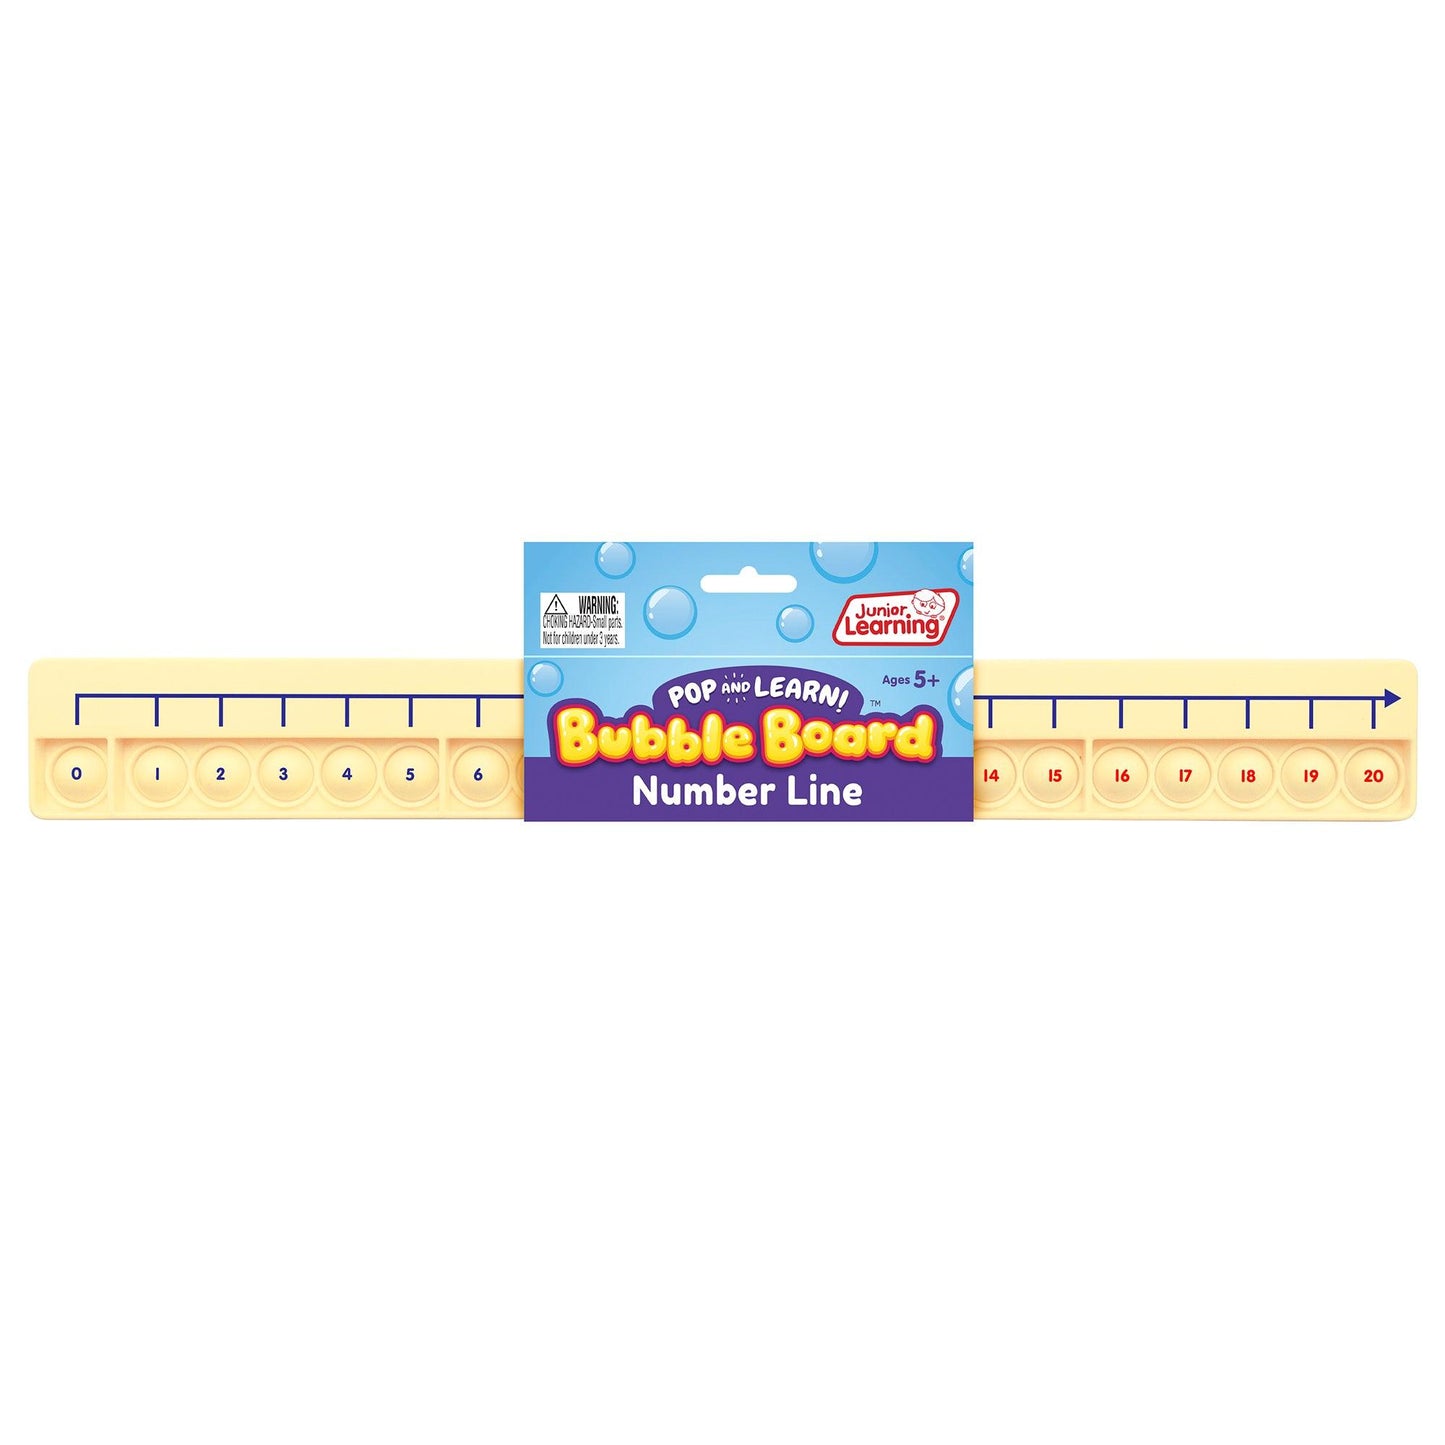 Number Line Pop and Learn™ Bubble Board - Loomini